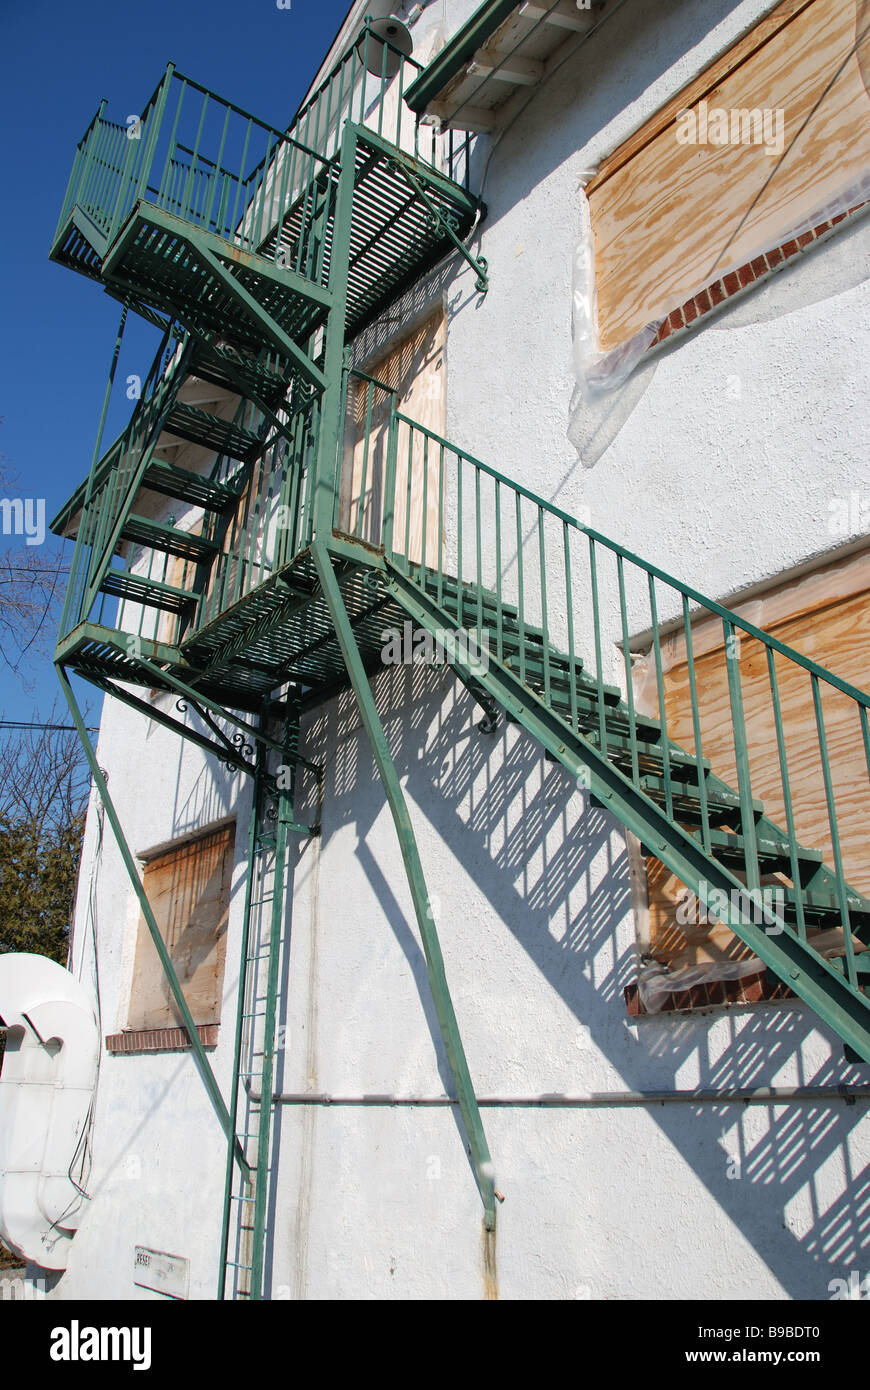 A green fire escape on the side of a boarded up and abandoned former luxury hotel building in Toronto Canada. Stock Photo